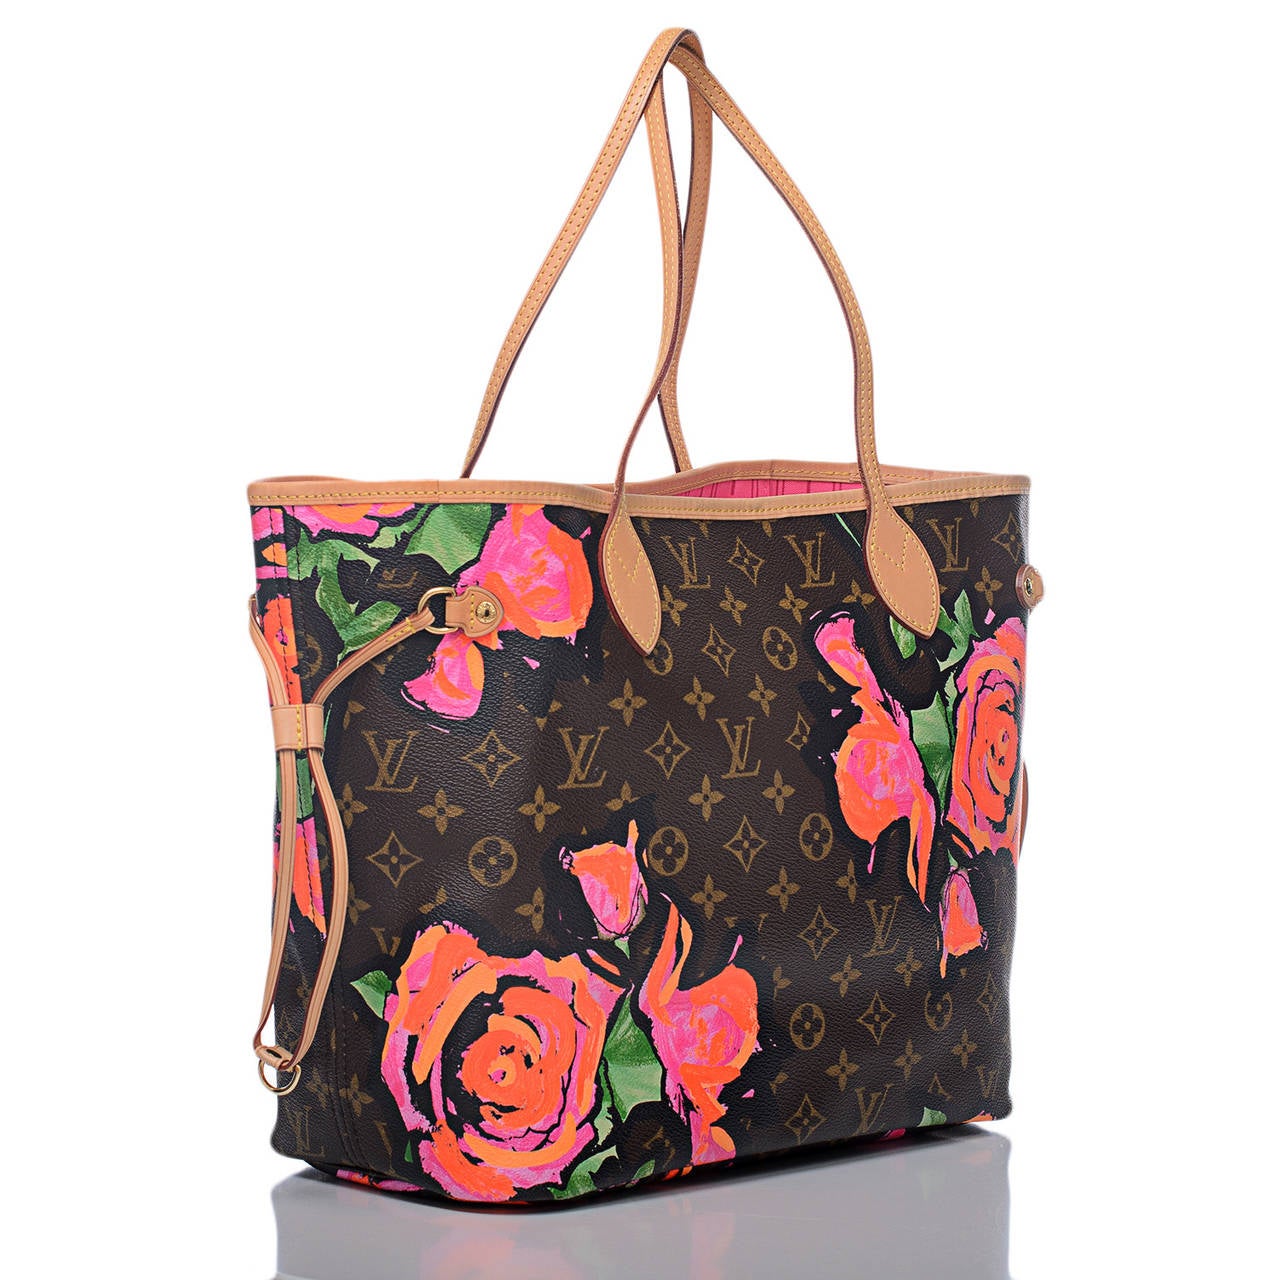 Louis Vuitton Monogram Roses Neverfull MM of coated canvas overlaid with Day-Glo colored roses designed in tribute to Stephen Sprouse.

This classic tote features polished brass hardware, vachetta leather trim, adjustable drawstring sides, hidden